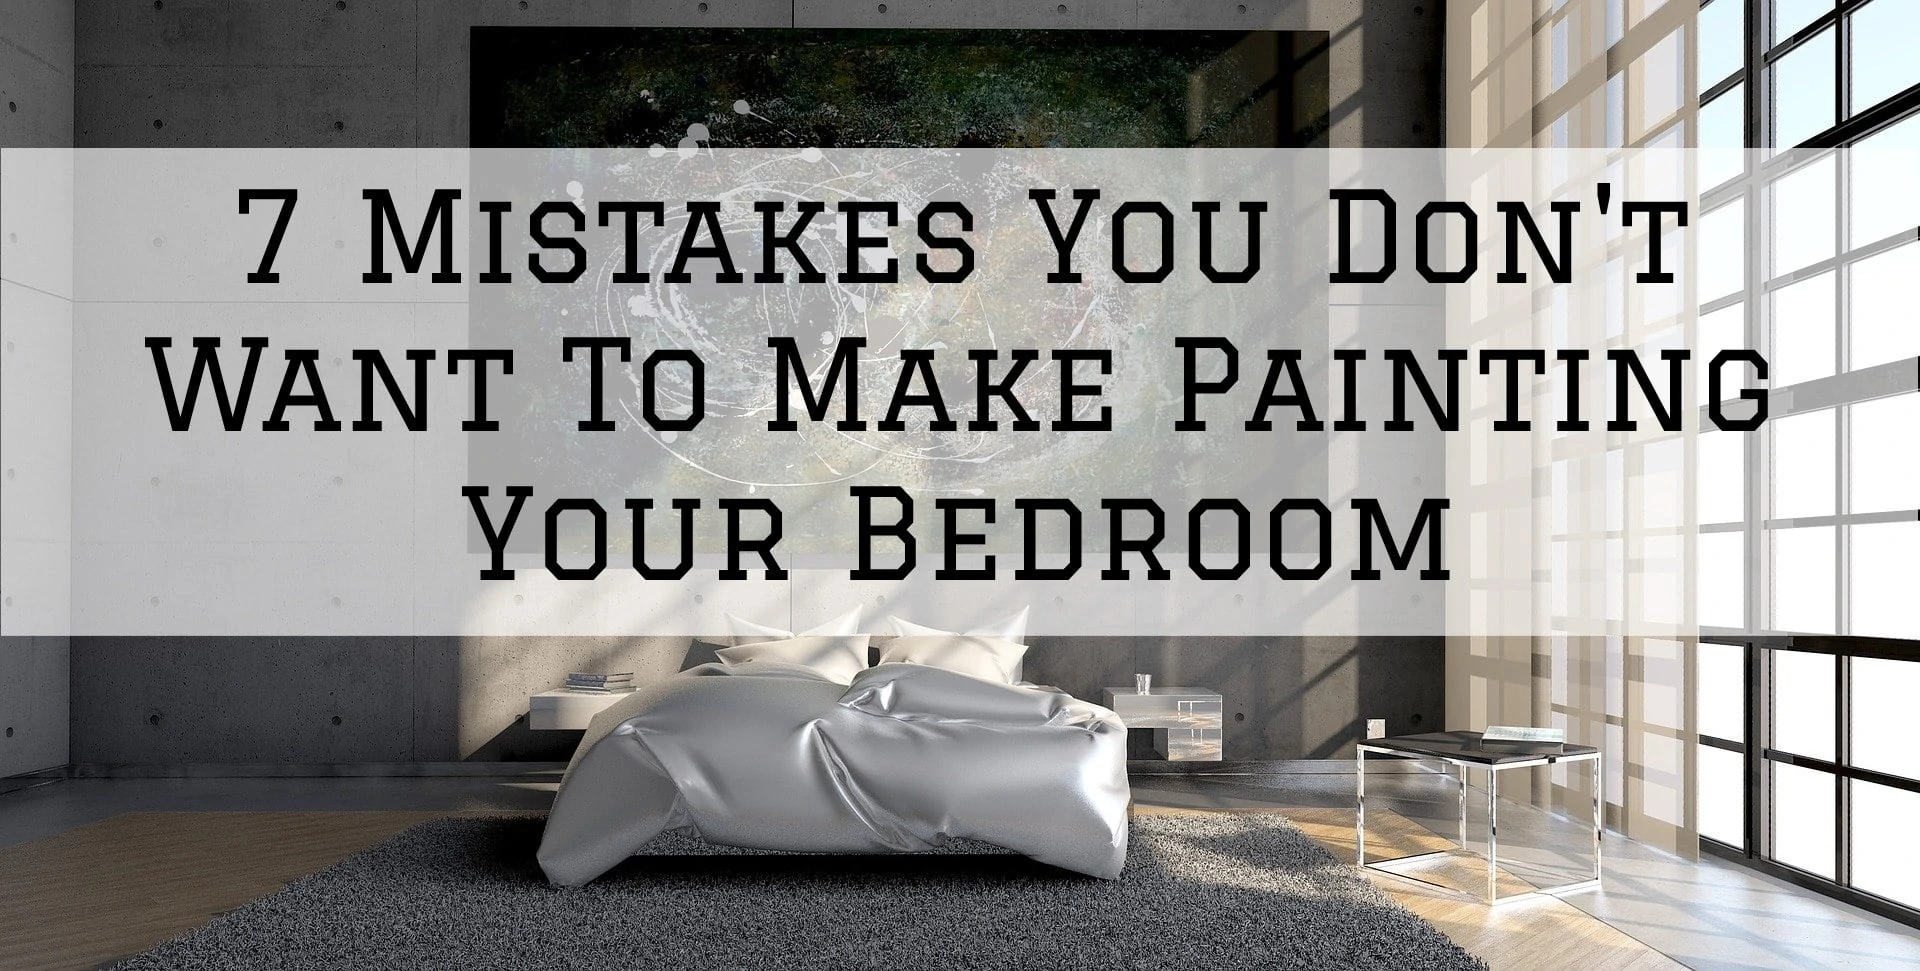 Mistakes you don't want to make when painting bedroom